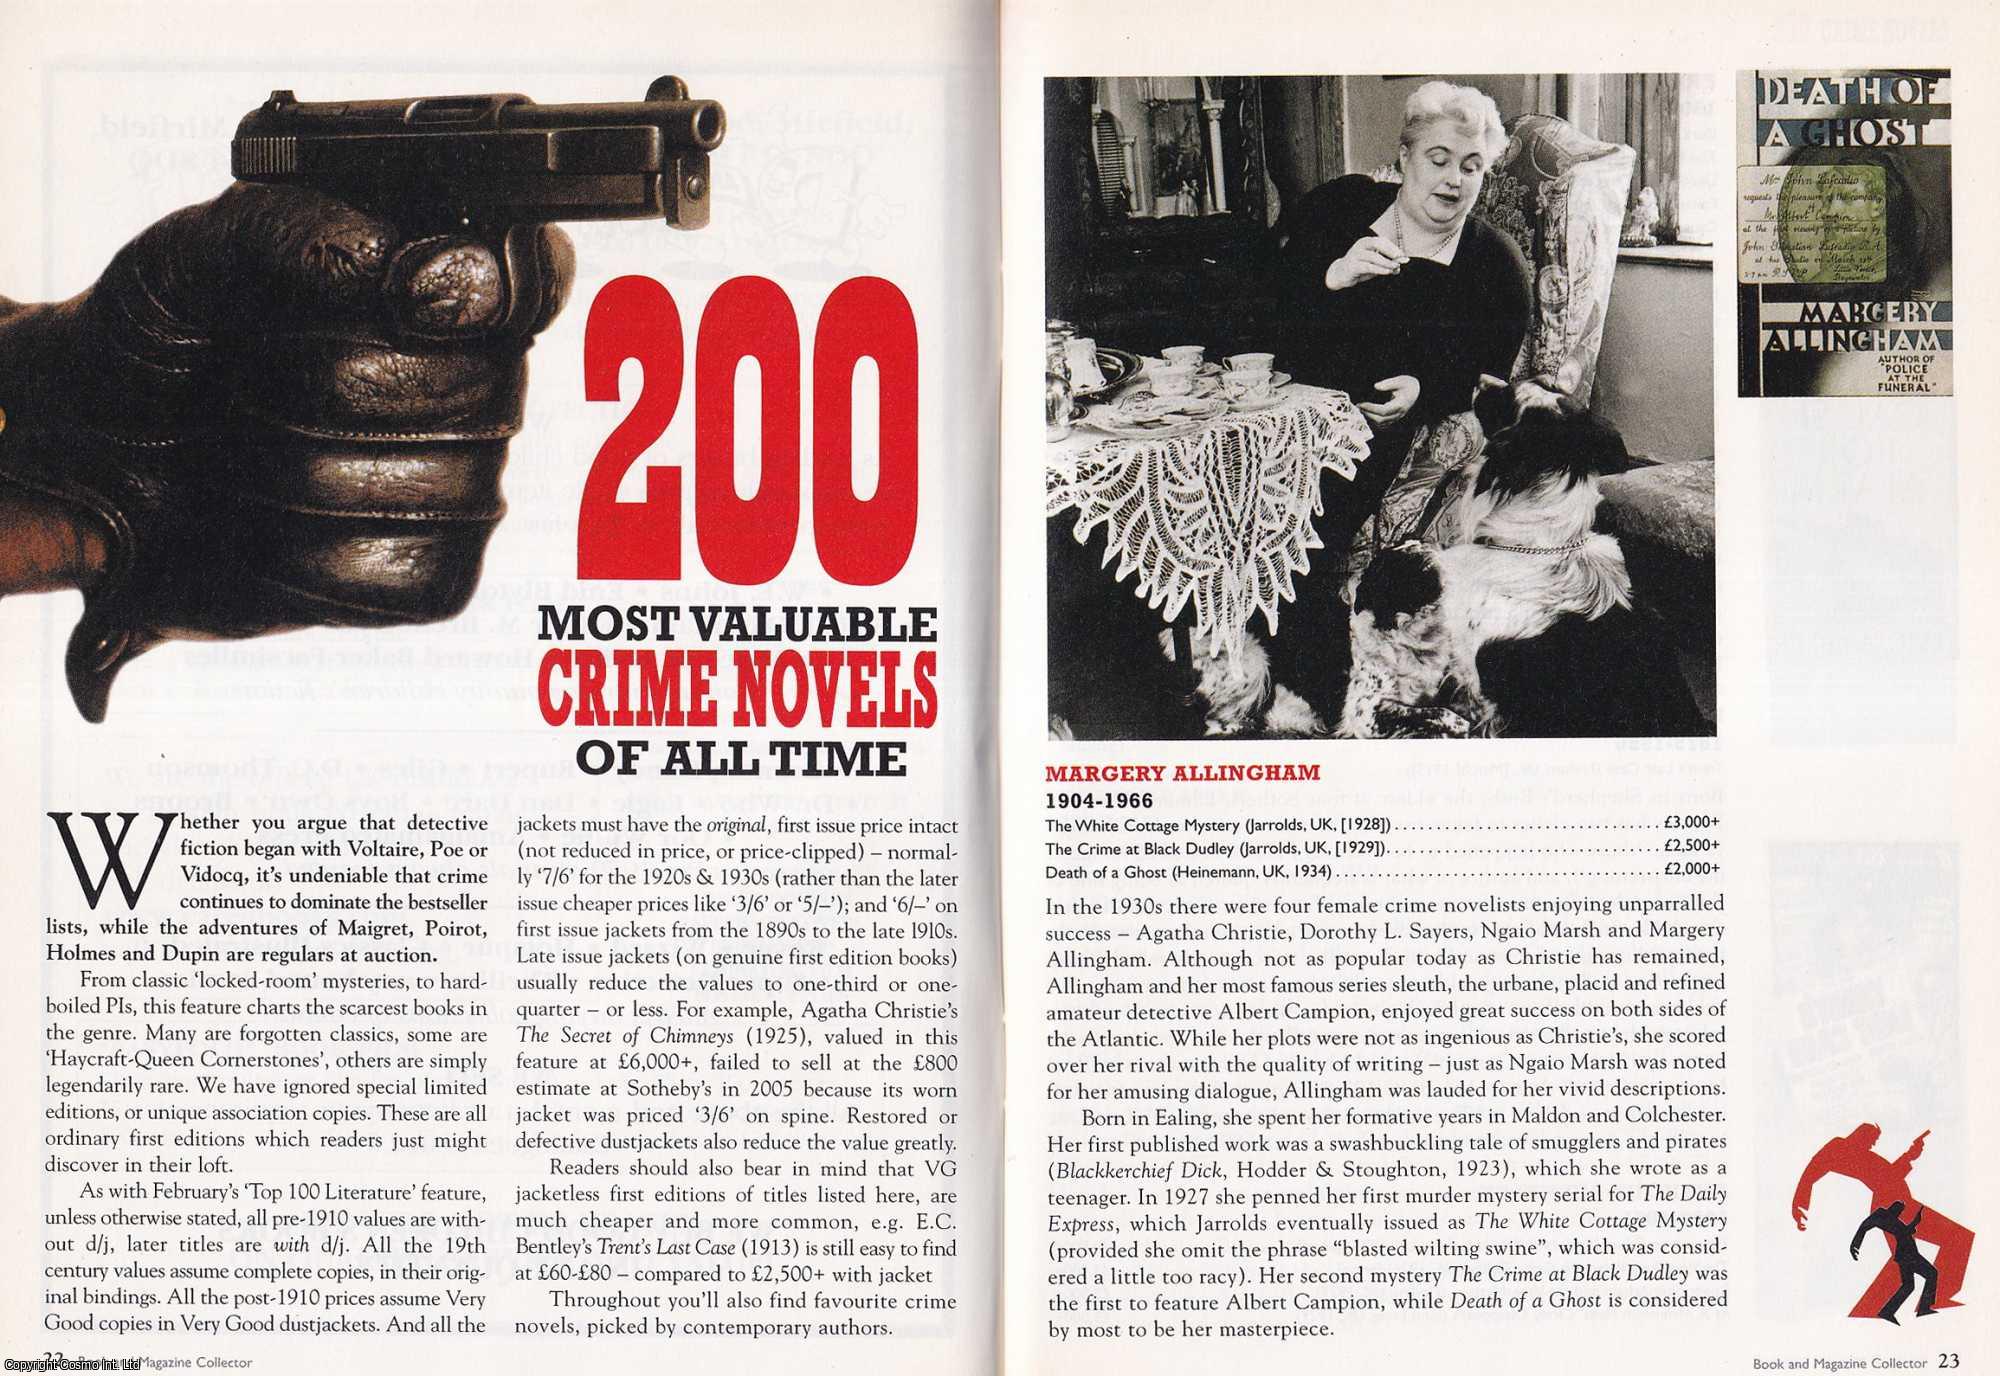 --- - 200 Most Valuable Crime Novels of All Time. This is an original article separated from an issue of The Book & Magazine Collector publication.